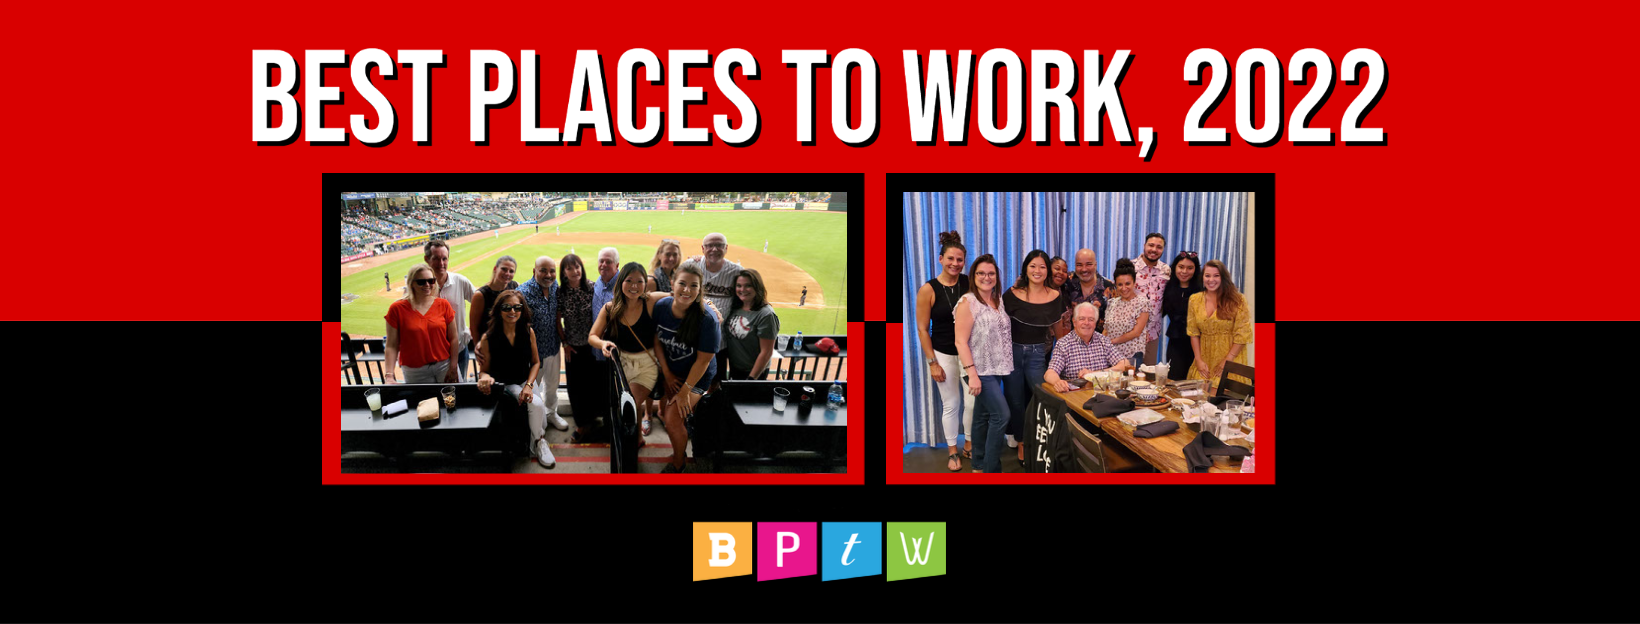 Hbj Best Places To Work 